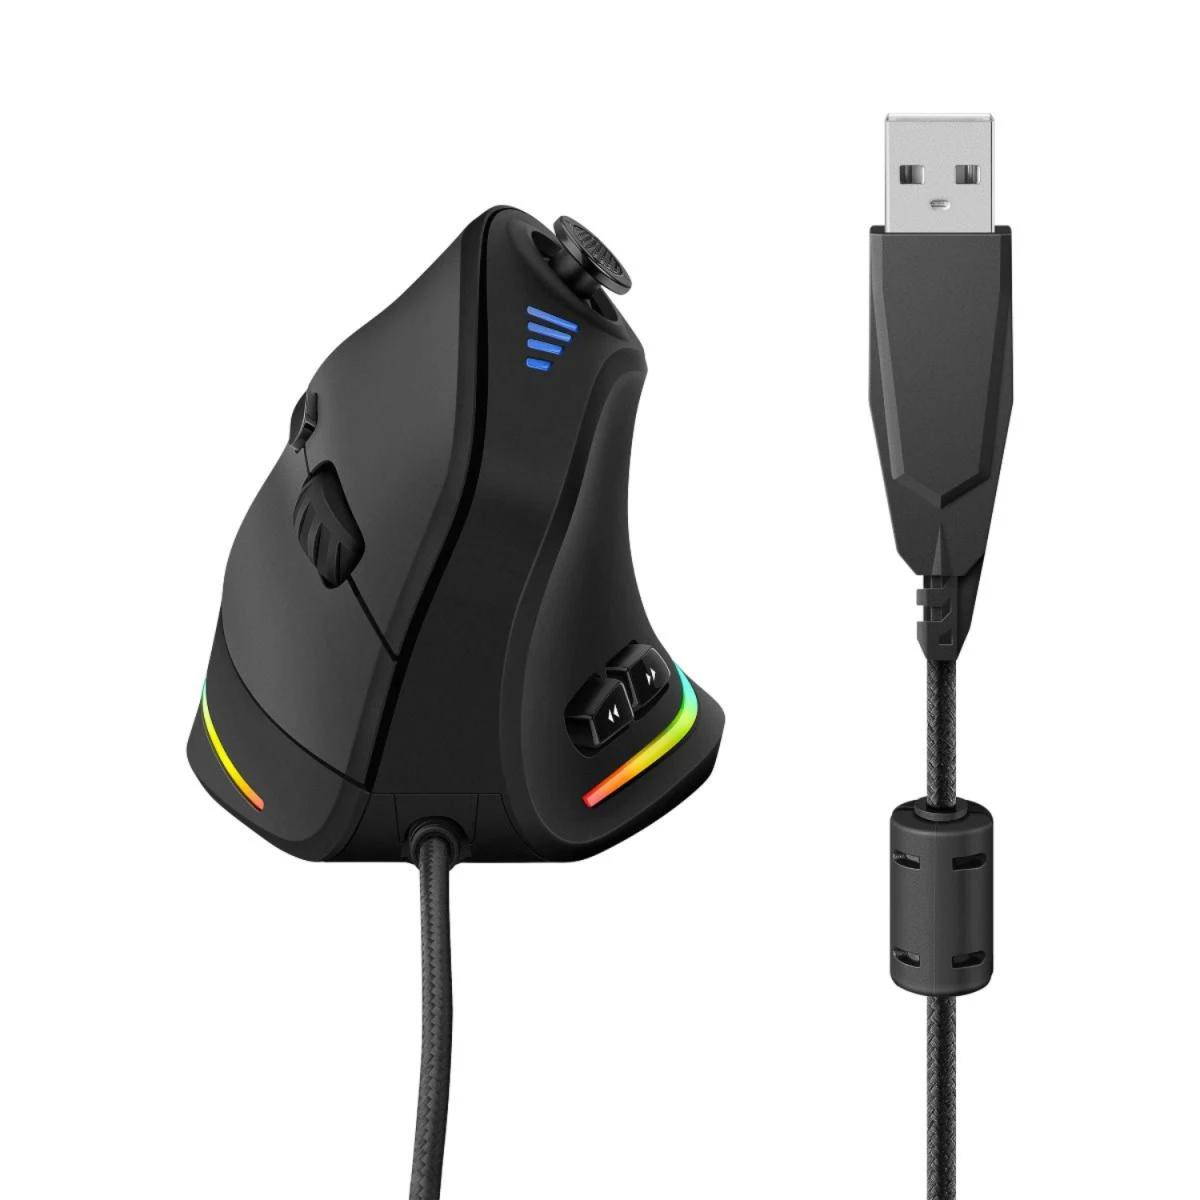 MOUSE USB VERTICAL PARA GAMERS